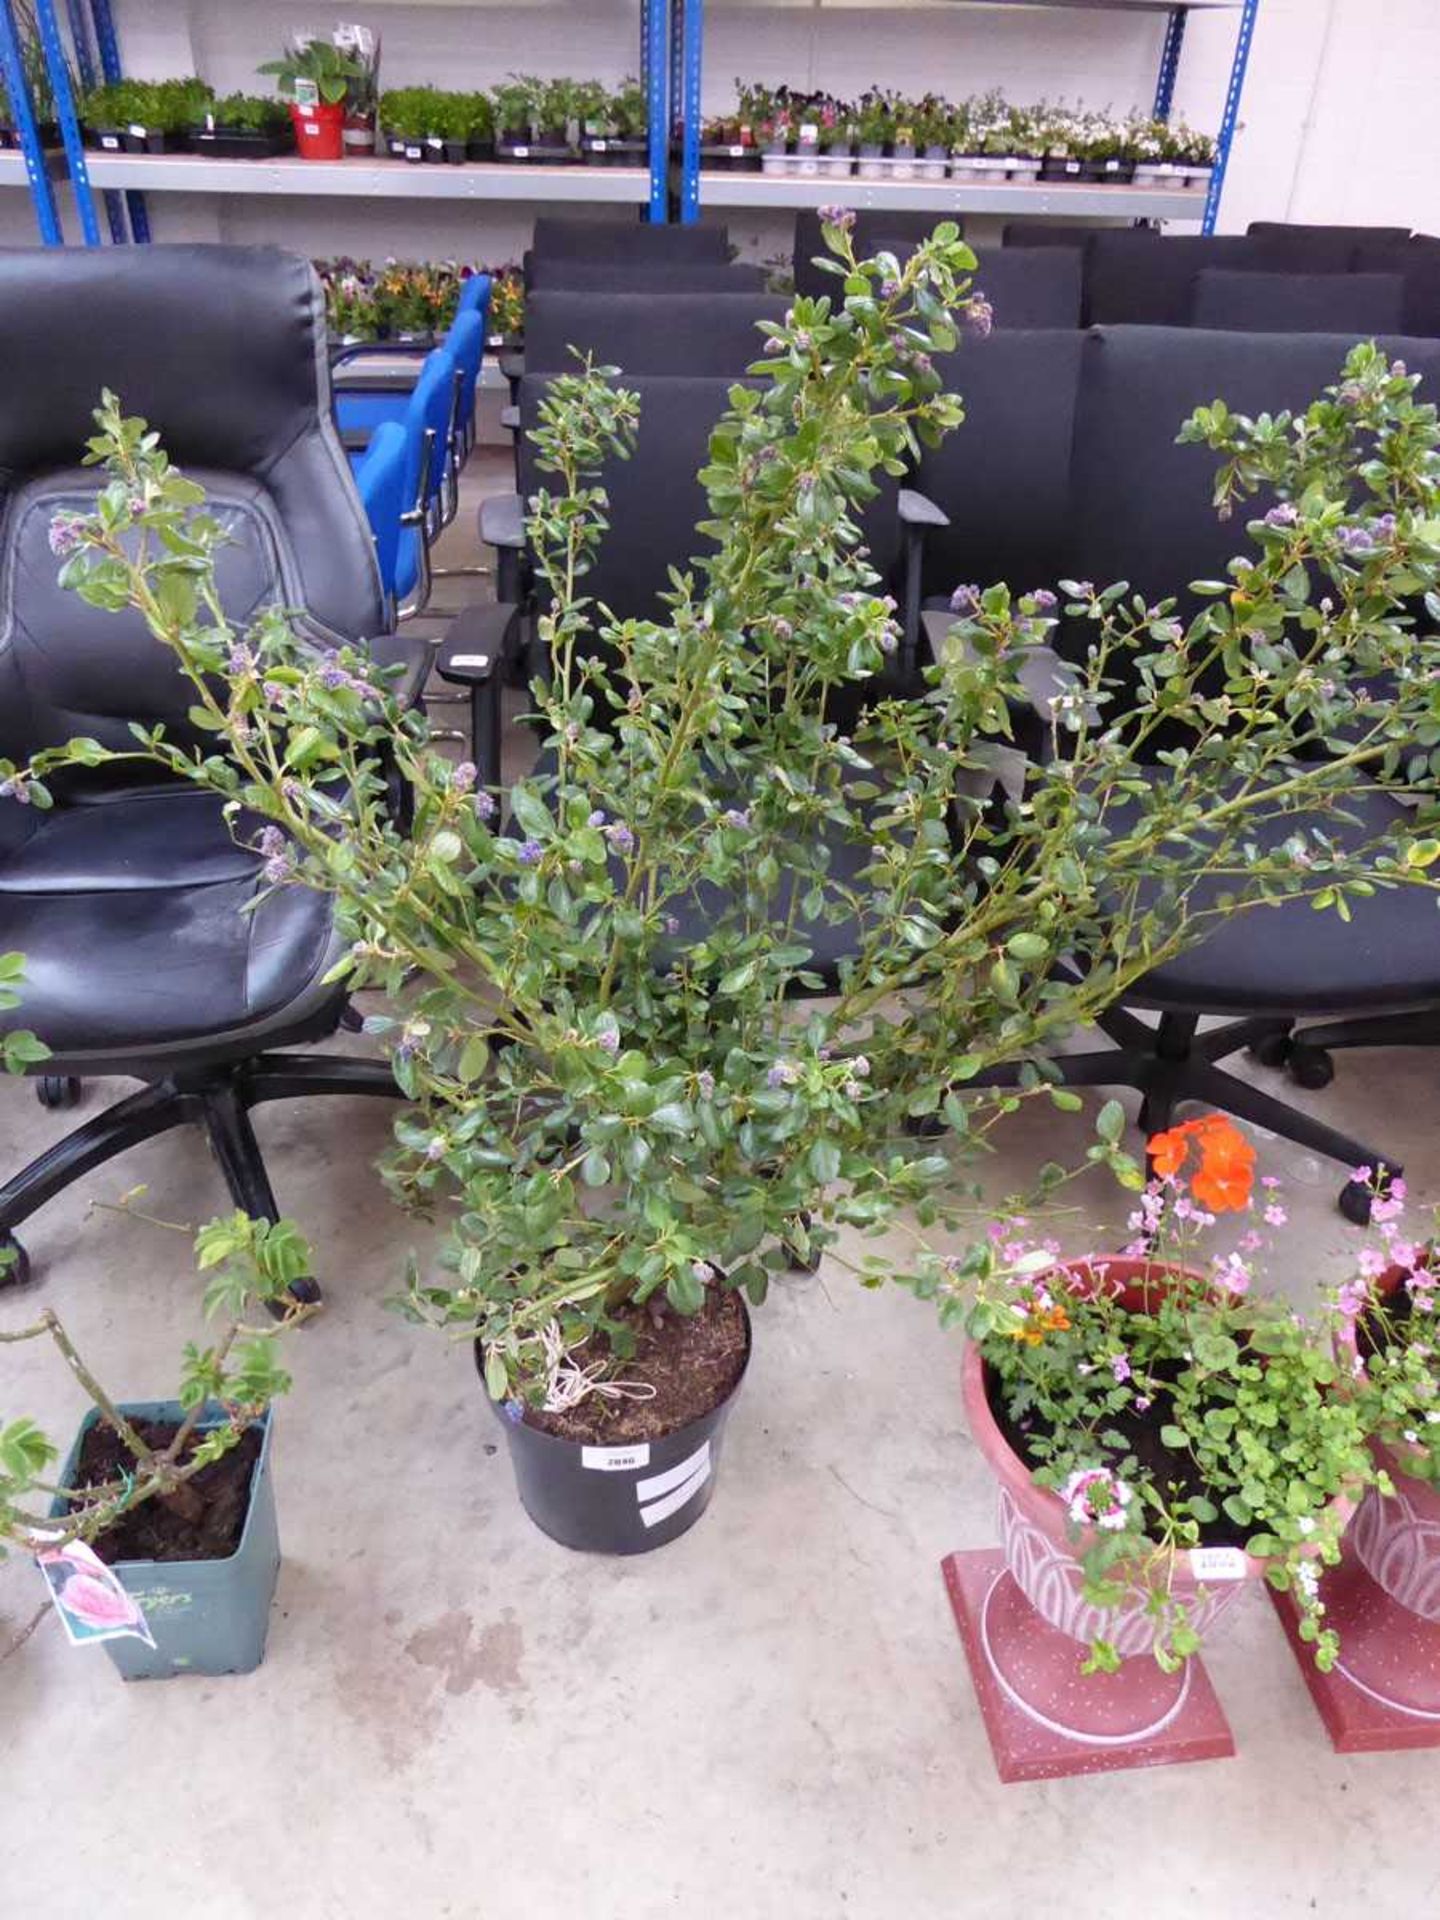 +VAT Large potted ceanothus yankee point